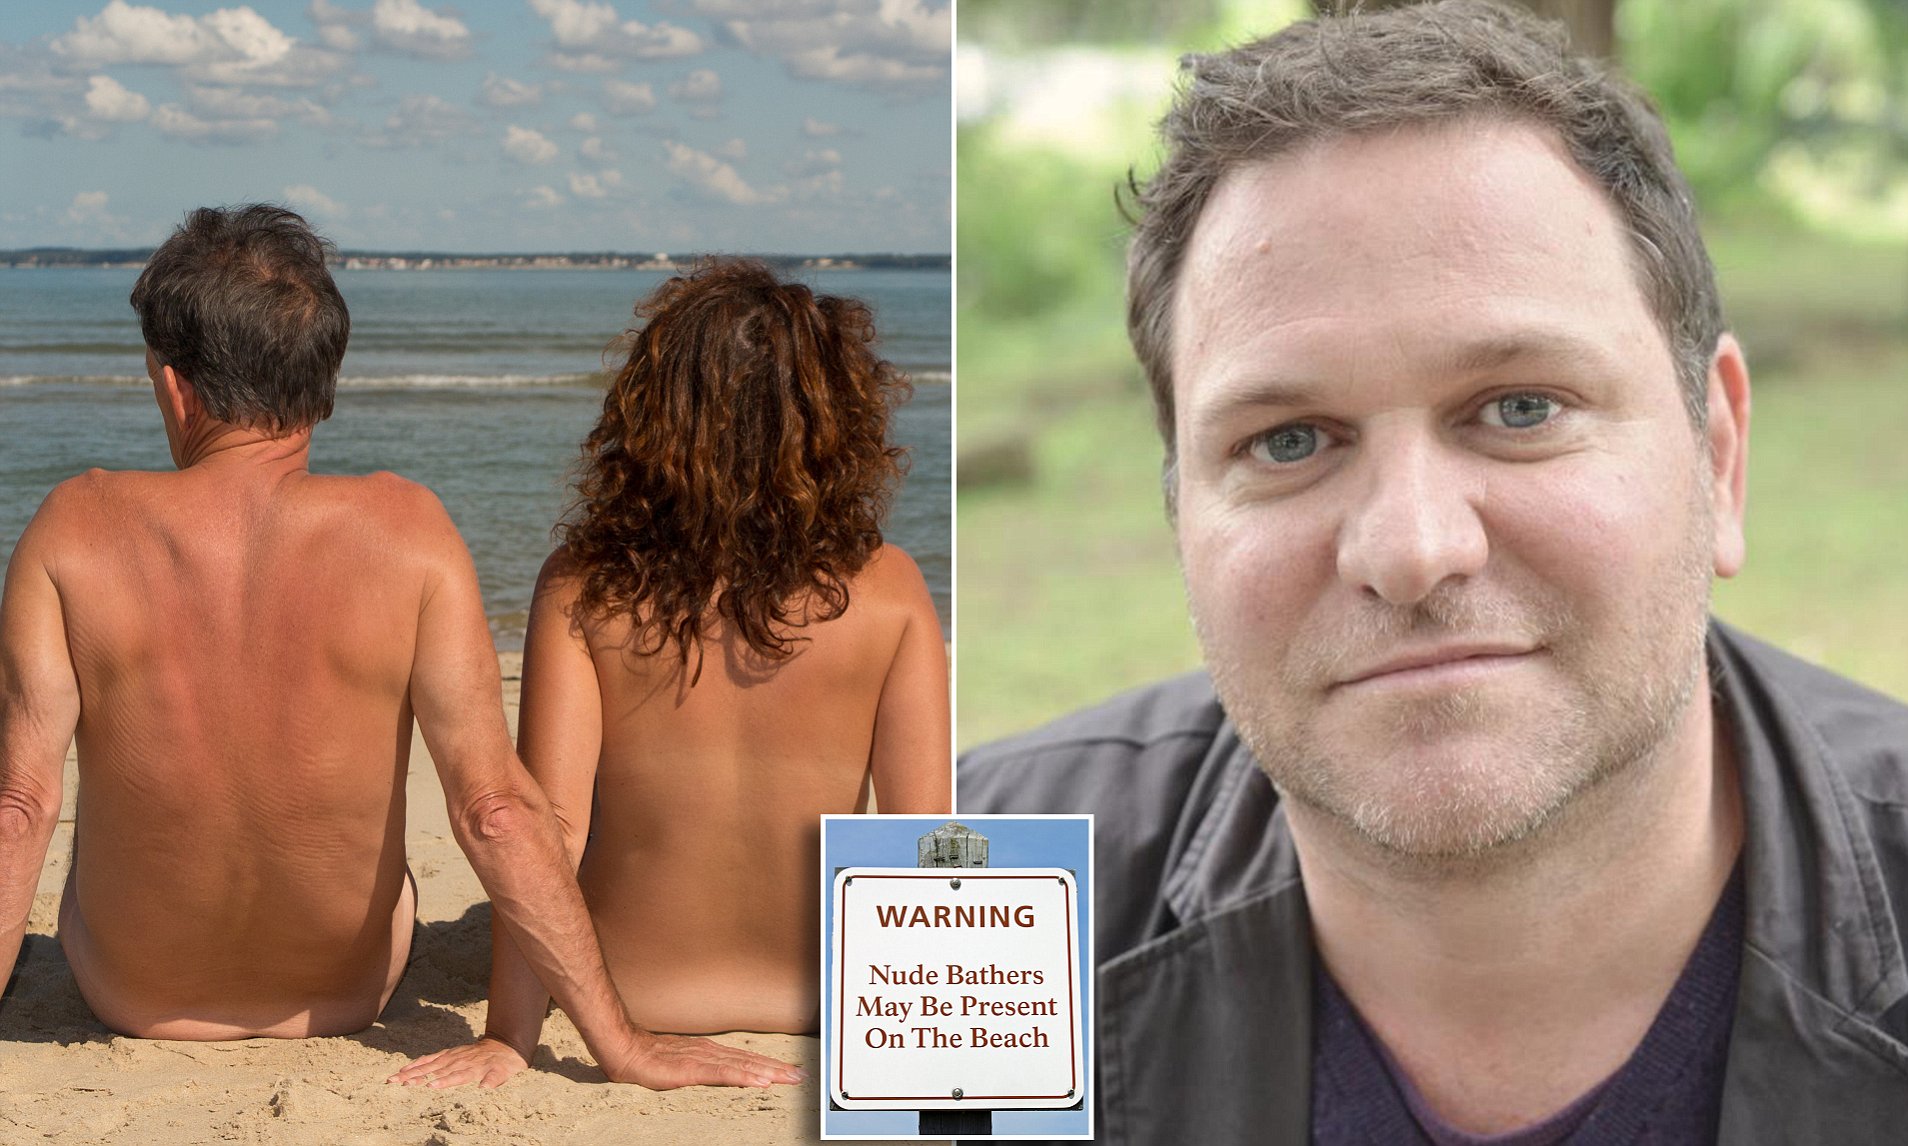 andy ravan recommends Is Sex Allowed On Nude Beaches